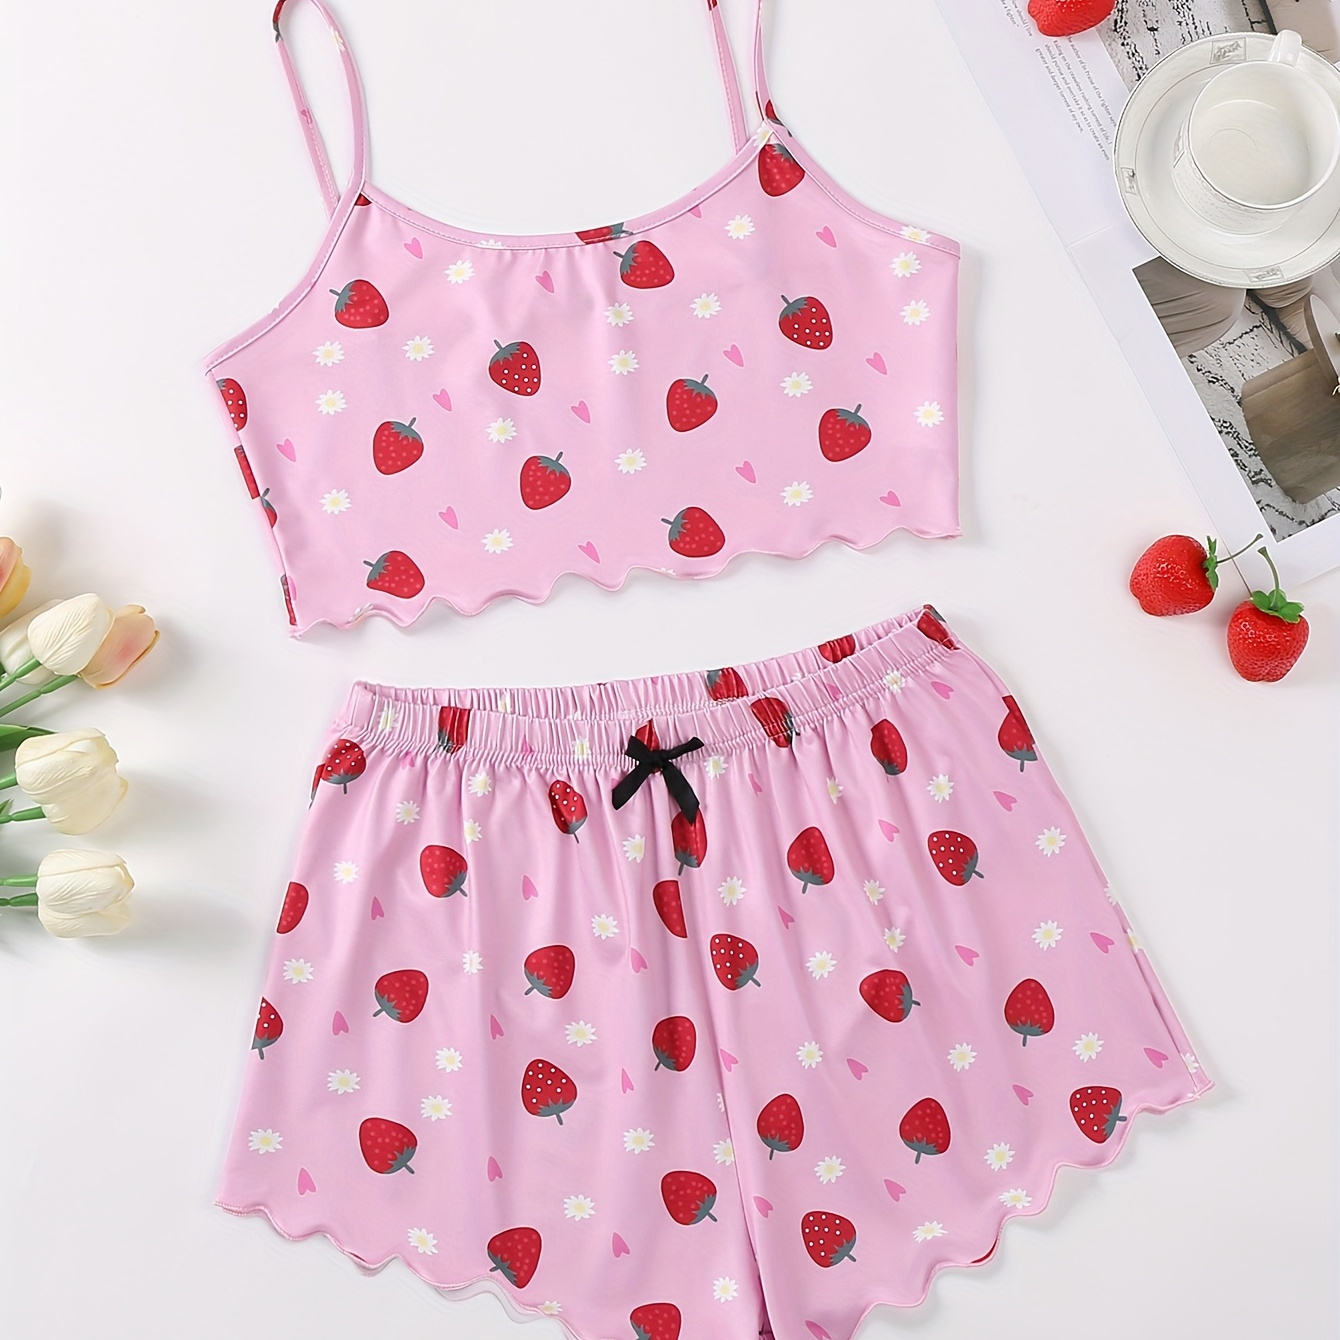 

Women's Strawberry & Polka Dot Print Frill Trim Sexy Pajama Set, Round Neck Backless Crop Cami Top & Shorts, Comfortable Relaxed Fit, Summer Nightwear